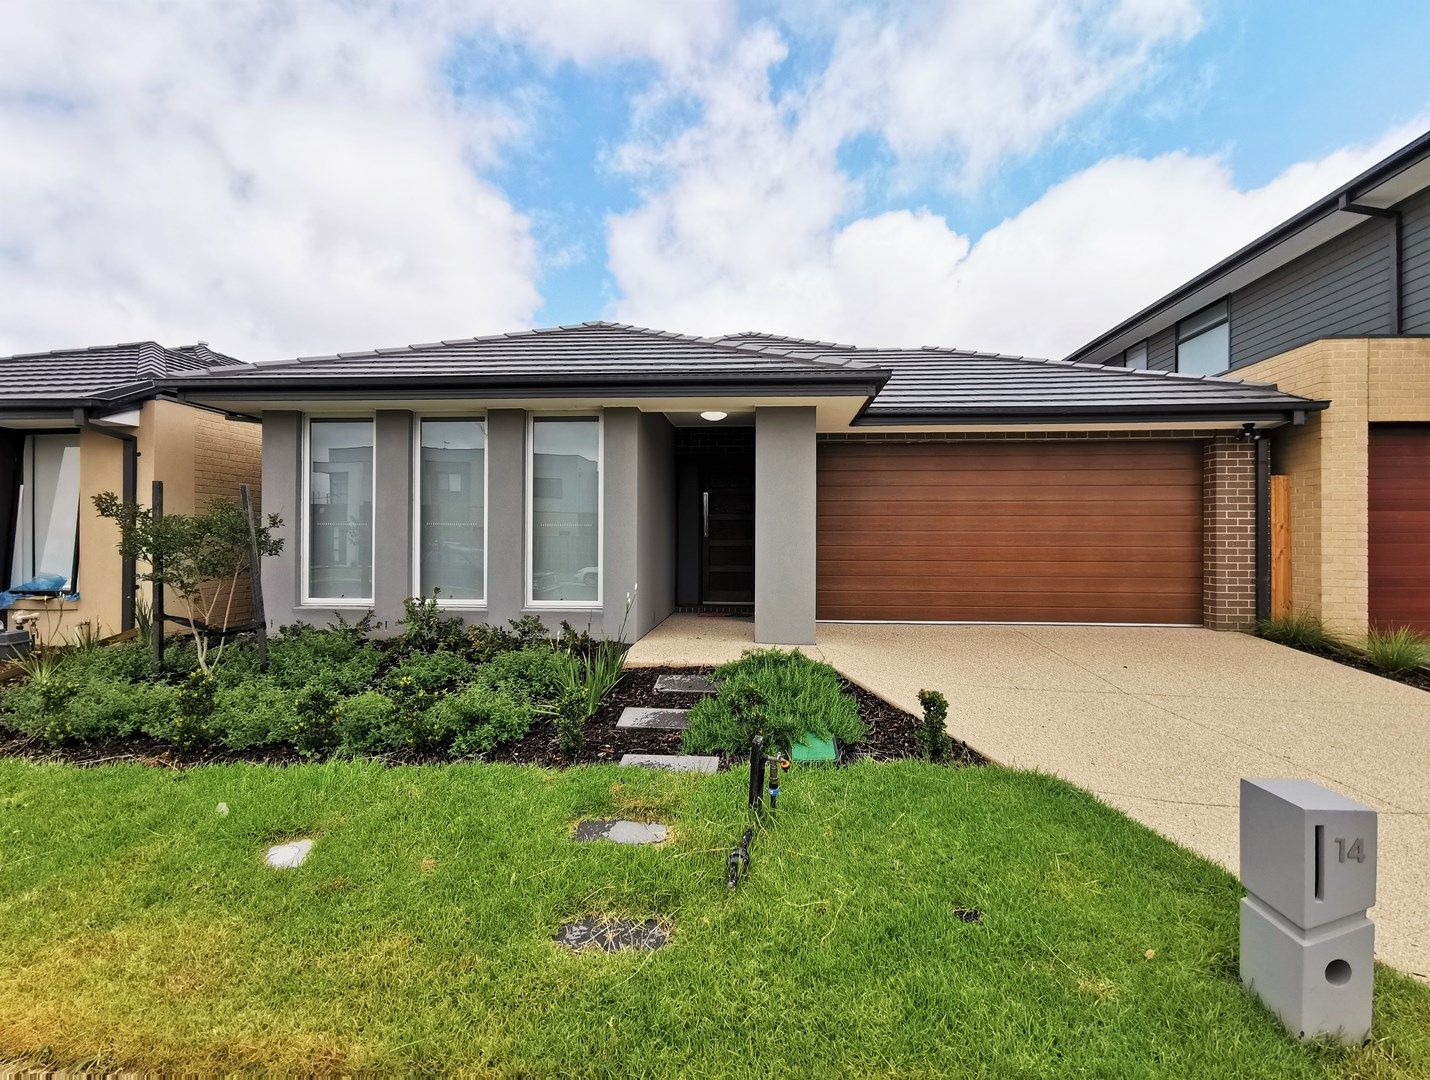 4 bedrooms House in 14 Beehive Drive WILLIAMS LANDING VIC, 3027